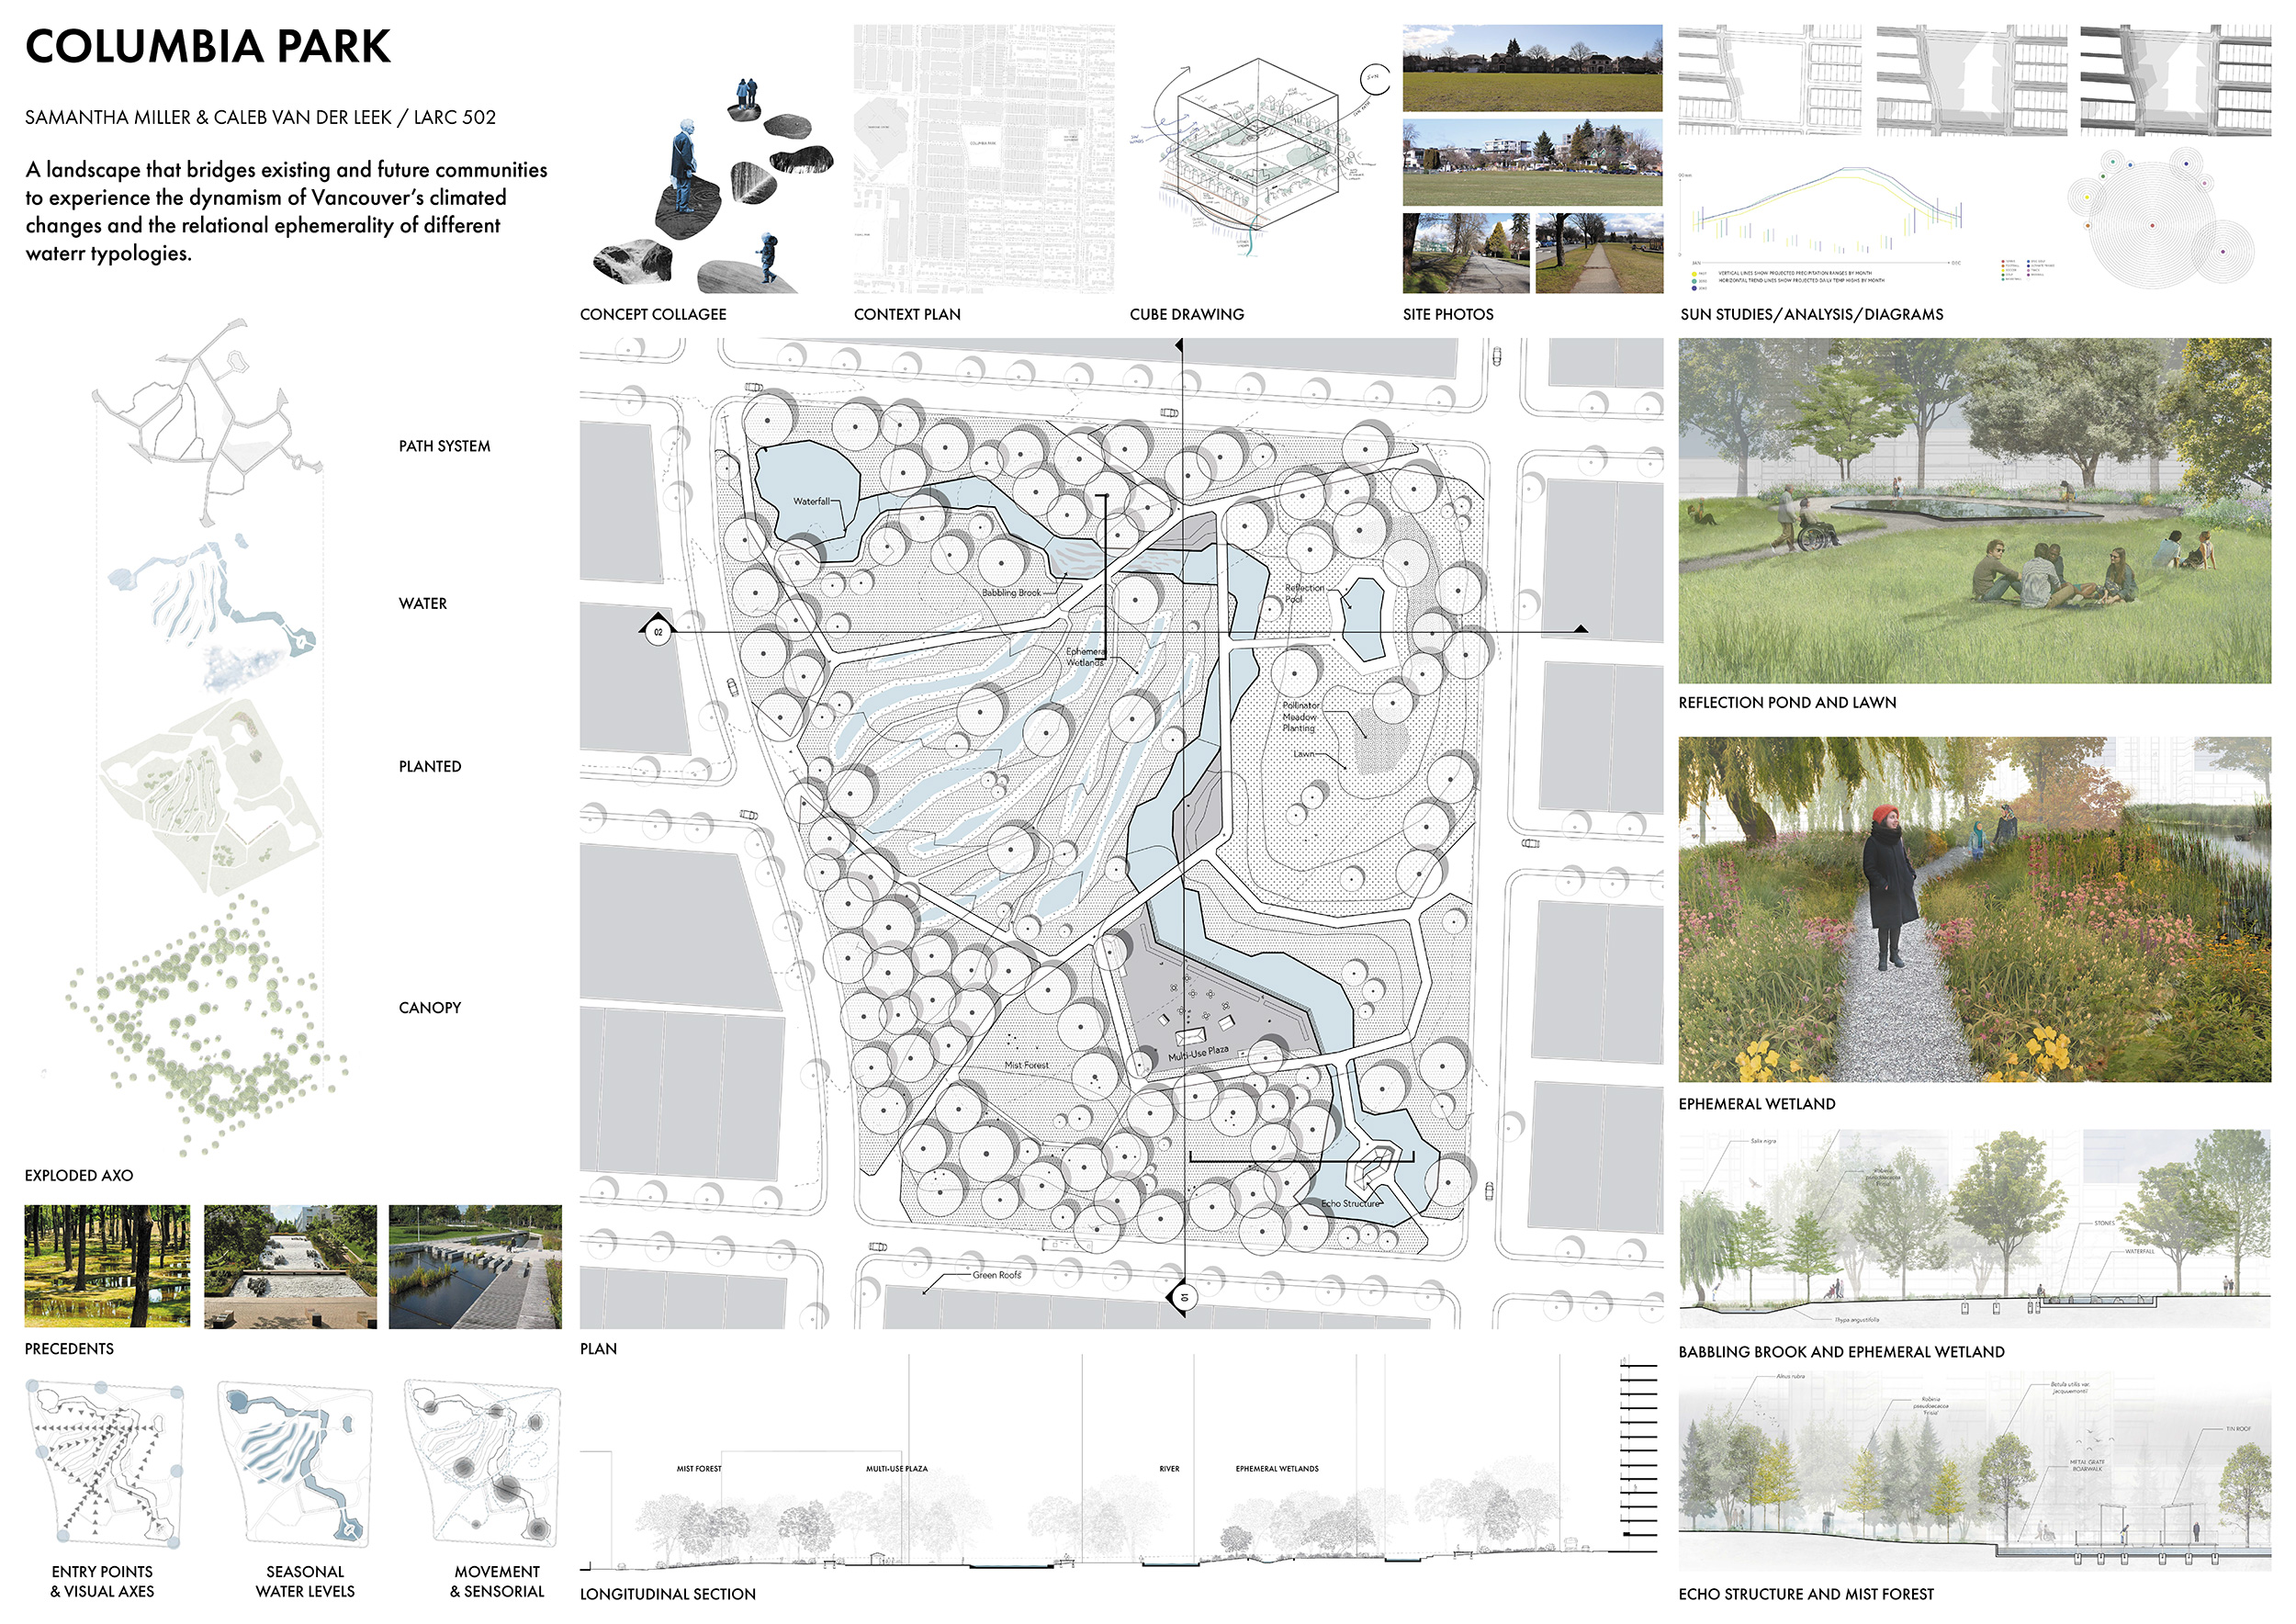 poster showing site plan, renderings, diagrams, and other design drawings.